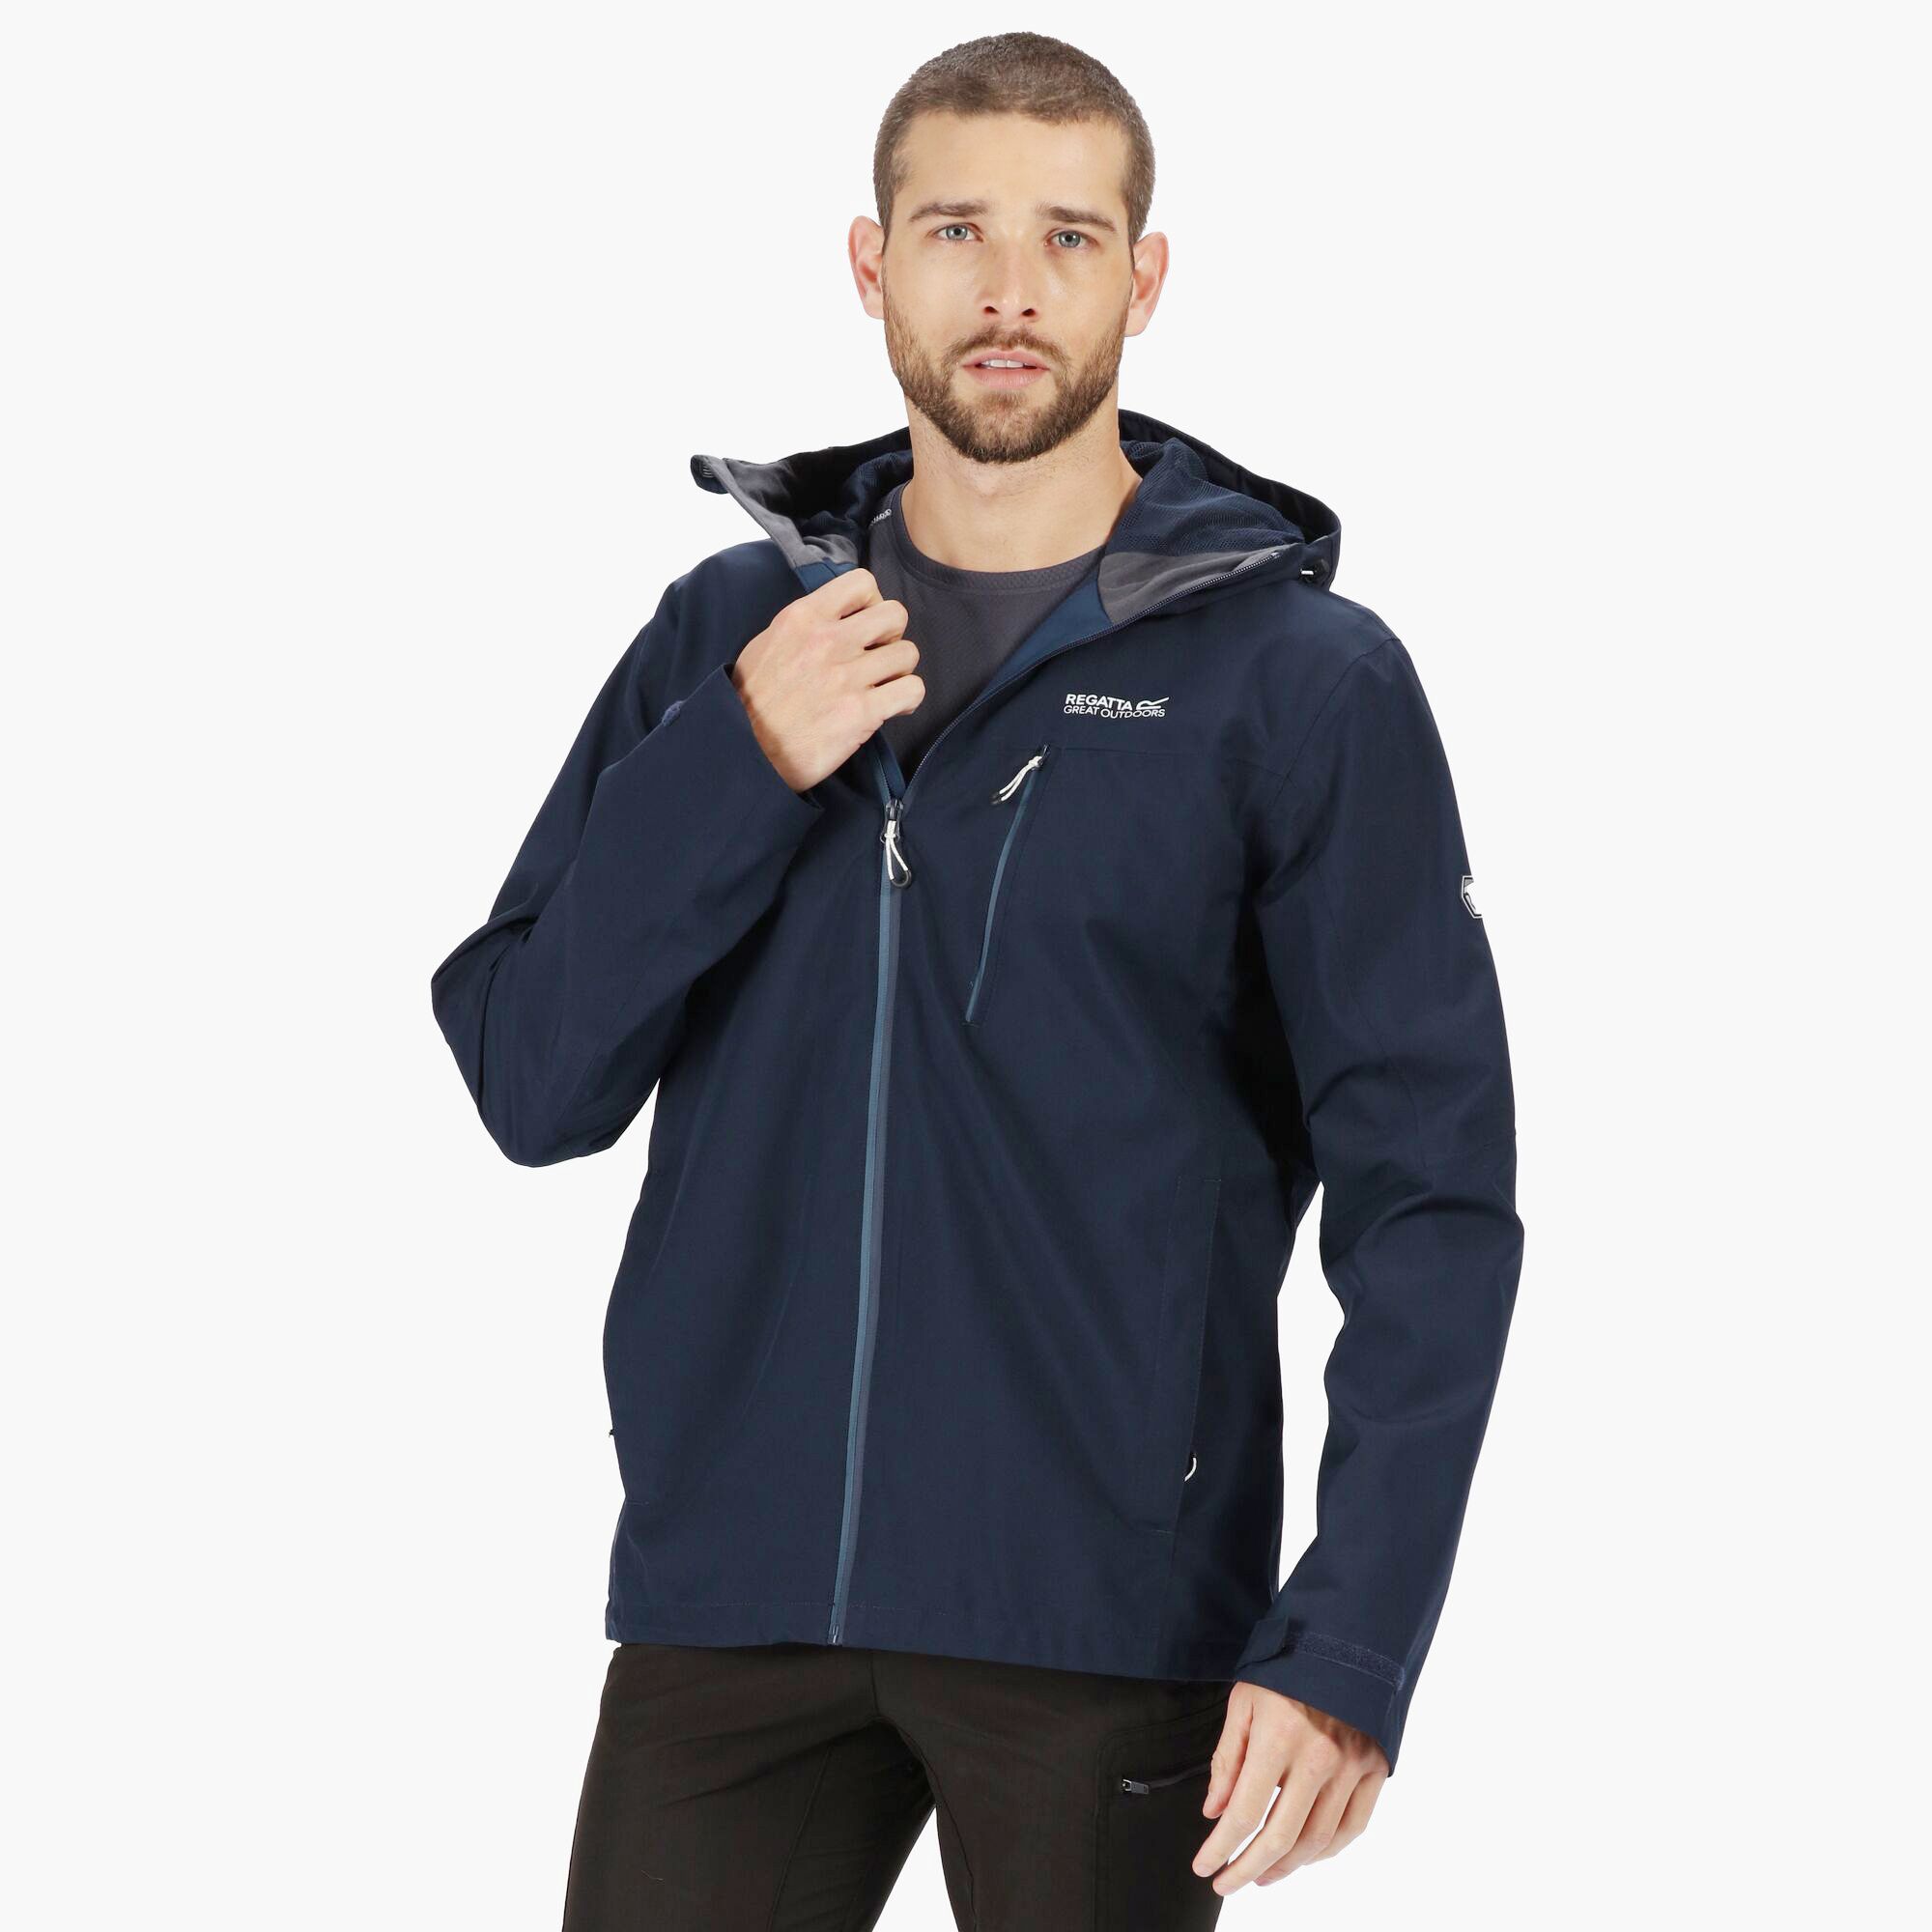 Waterproof hooded jacket with grown on technical hood with adjusters. Hi-tech water repellent centre front zip with inner zip and chin guard. Ideal for wet weather. 100% polyester. Hand wash.